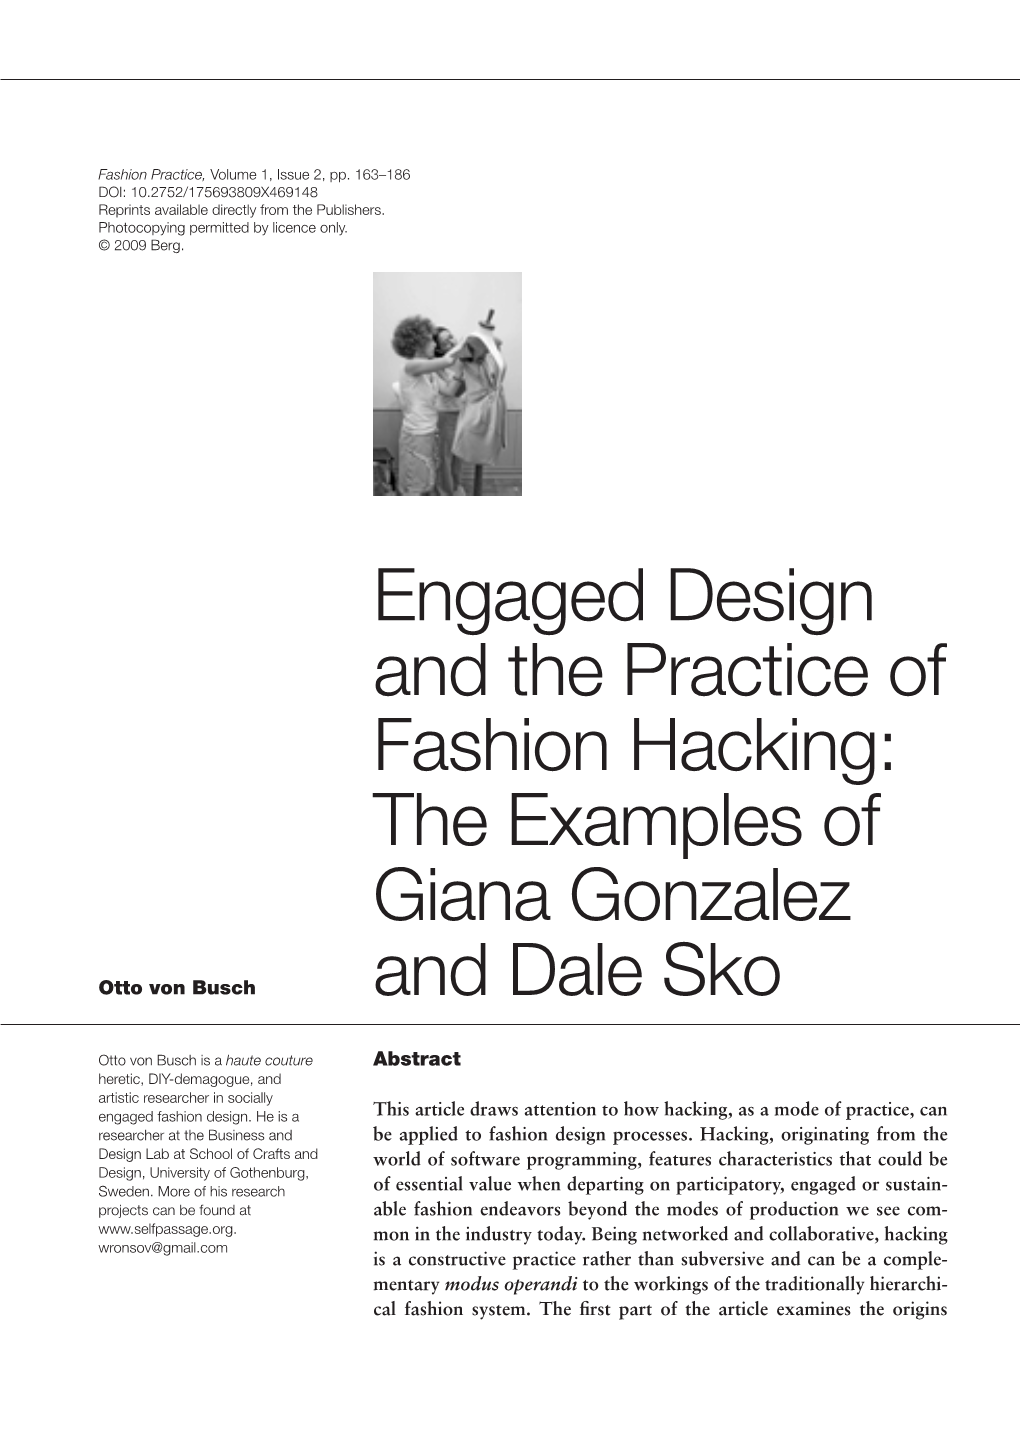 Engaged Design and the Practice of Fashion Hacking: the Examples of Giana Gonzalez